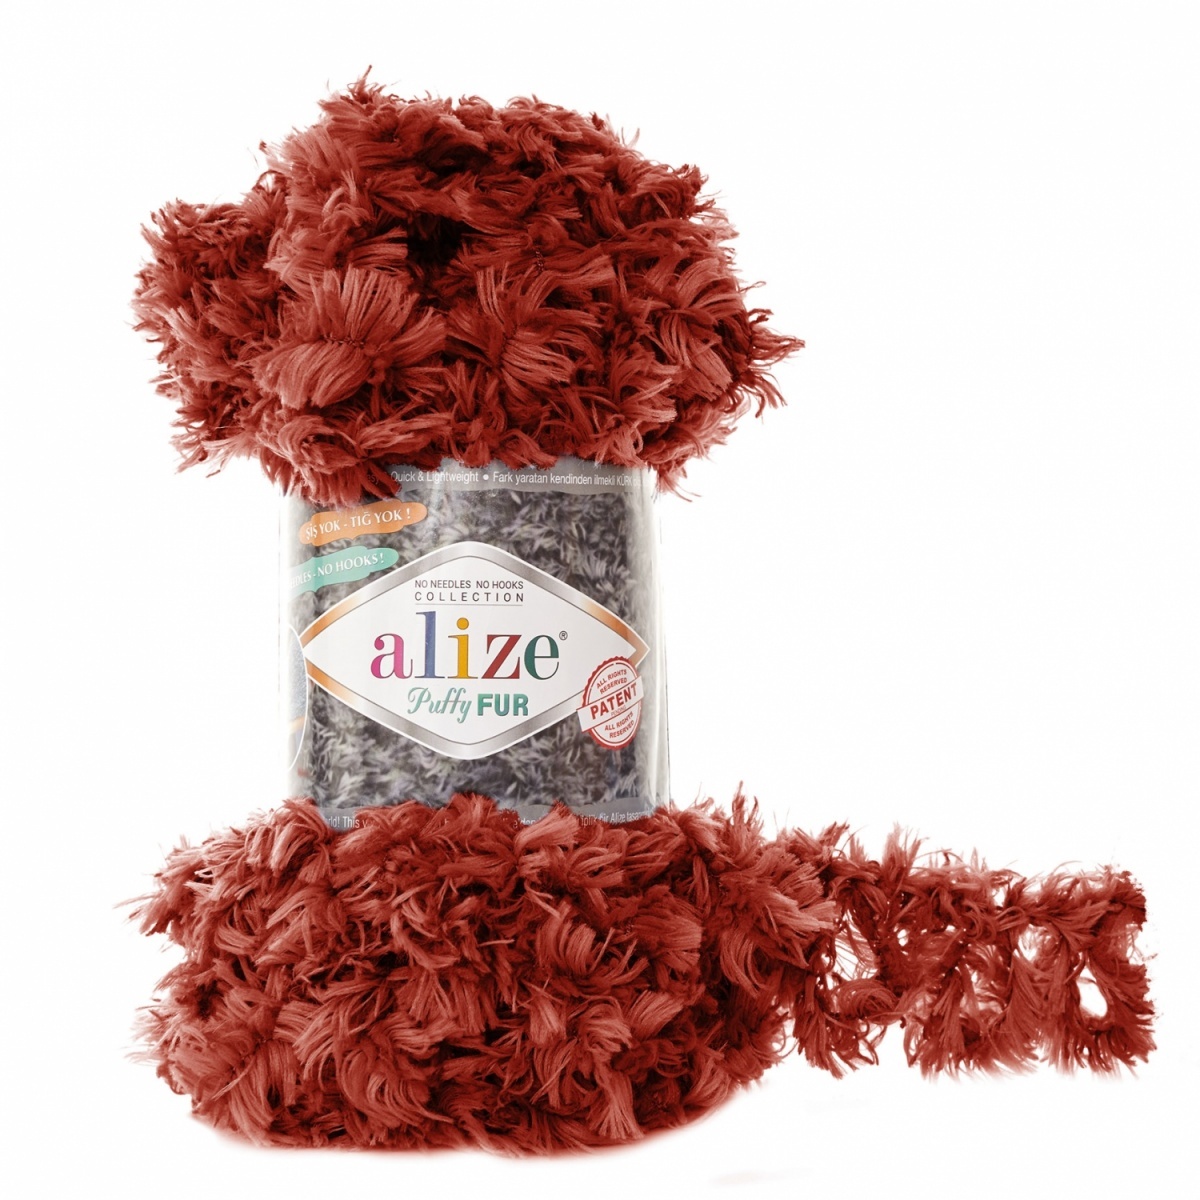 Alize Puffy Fur, 100% Polyester 5 Skein Value Pack, 500g фото 15